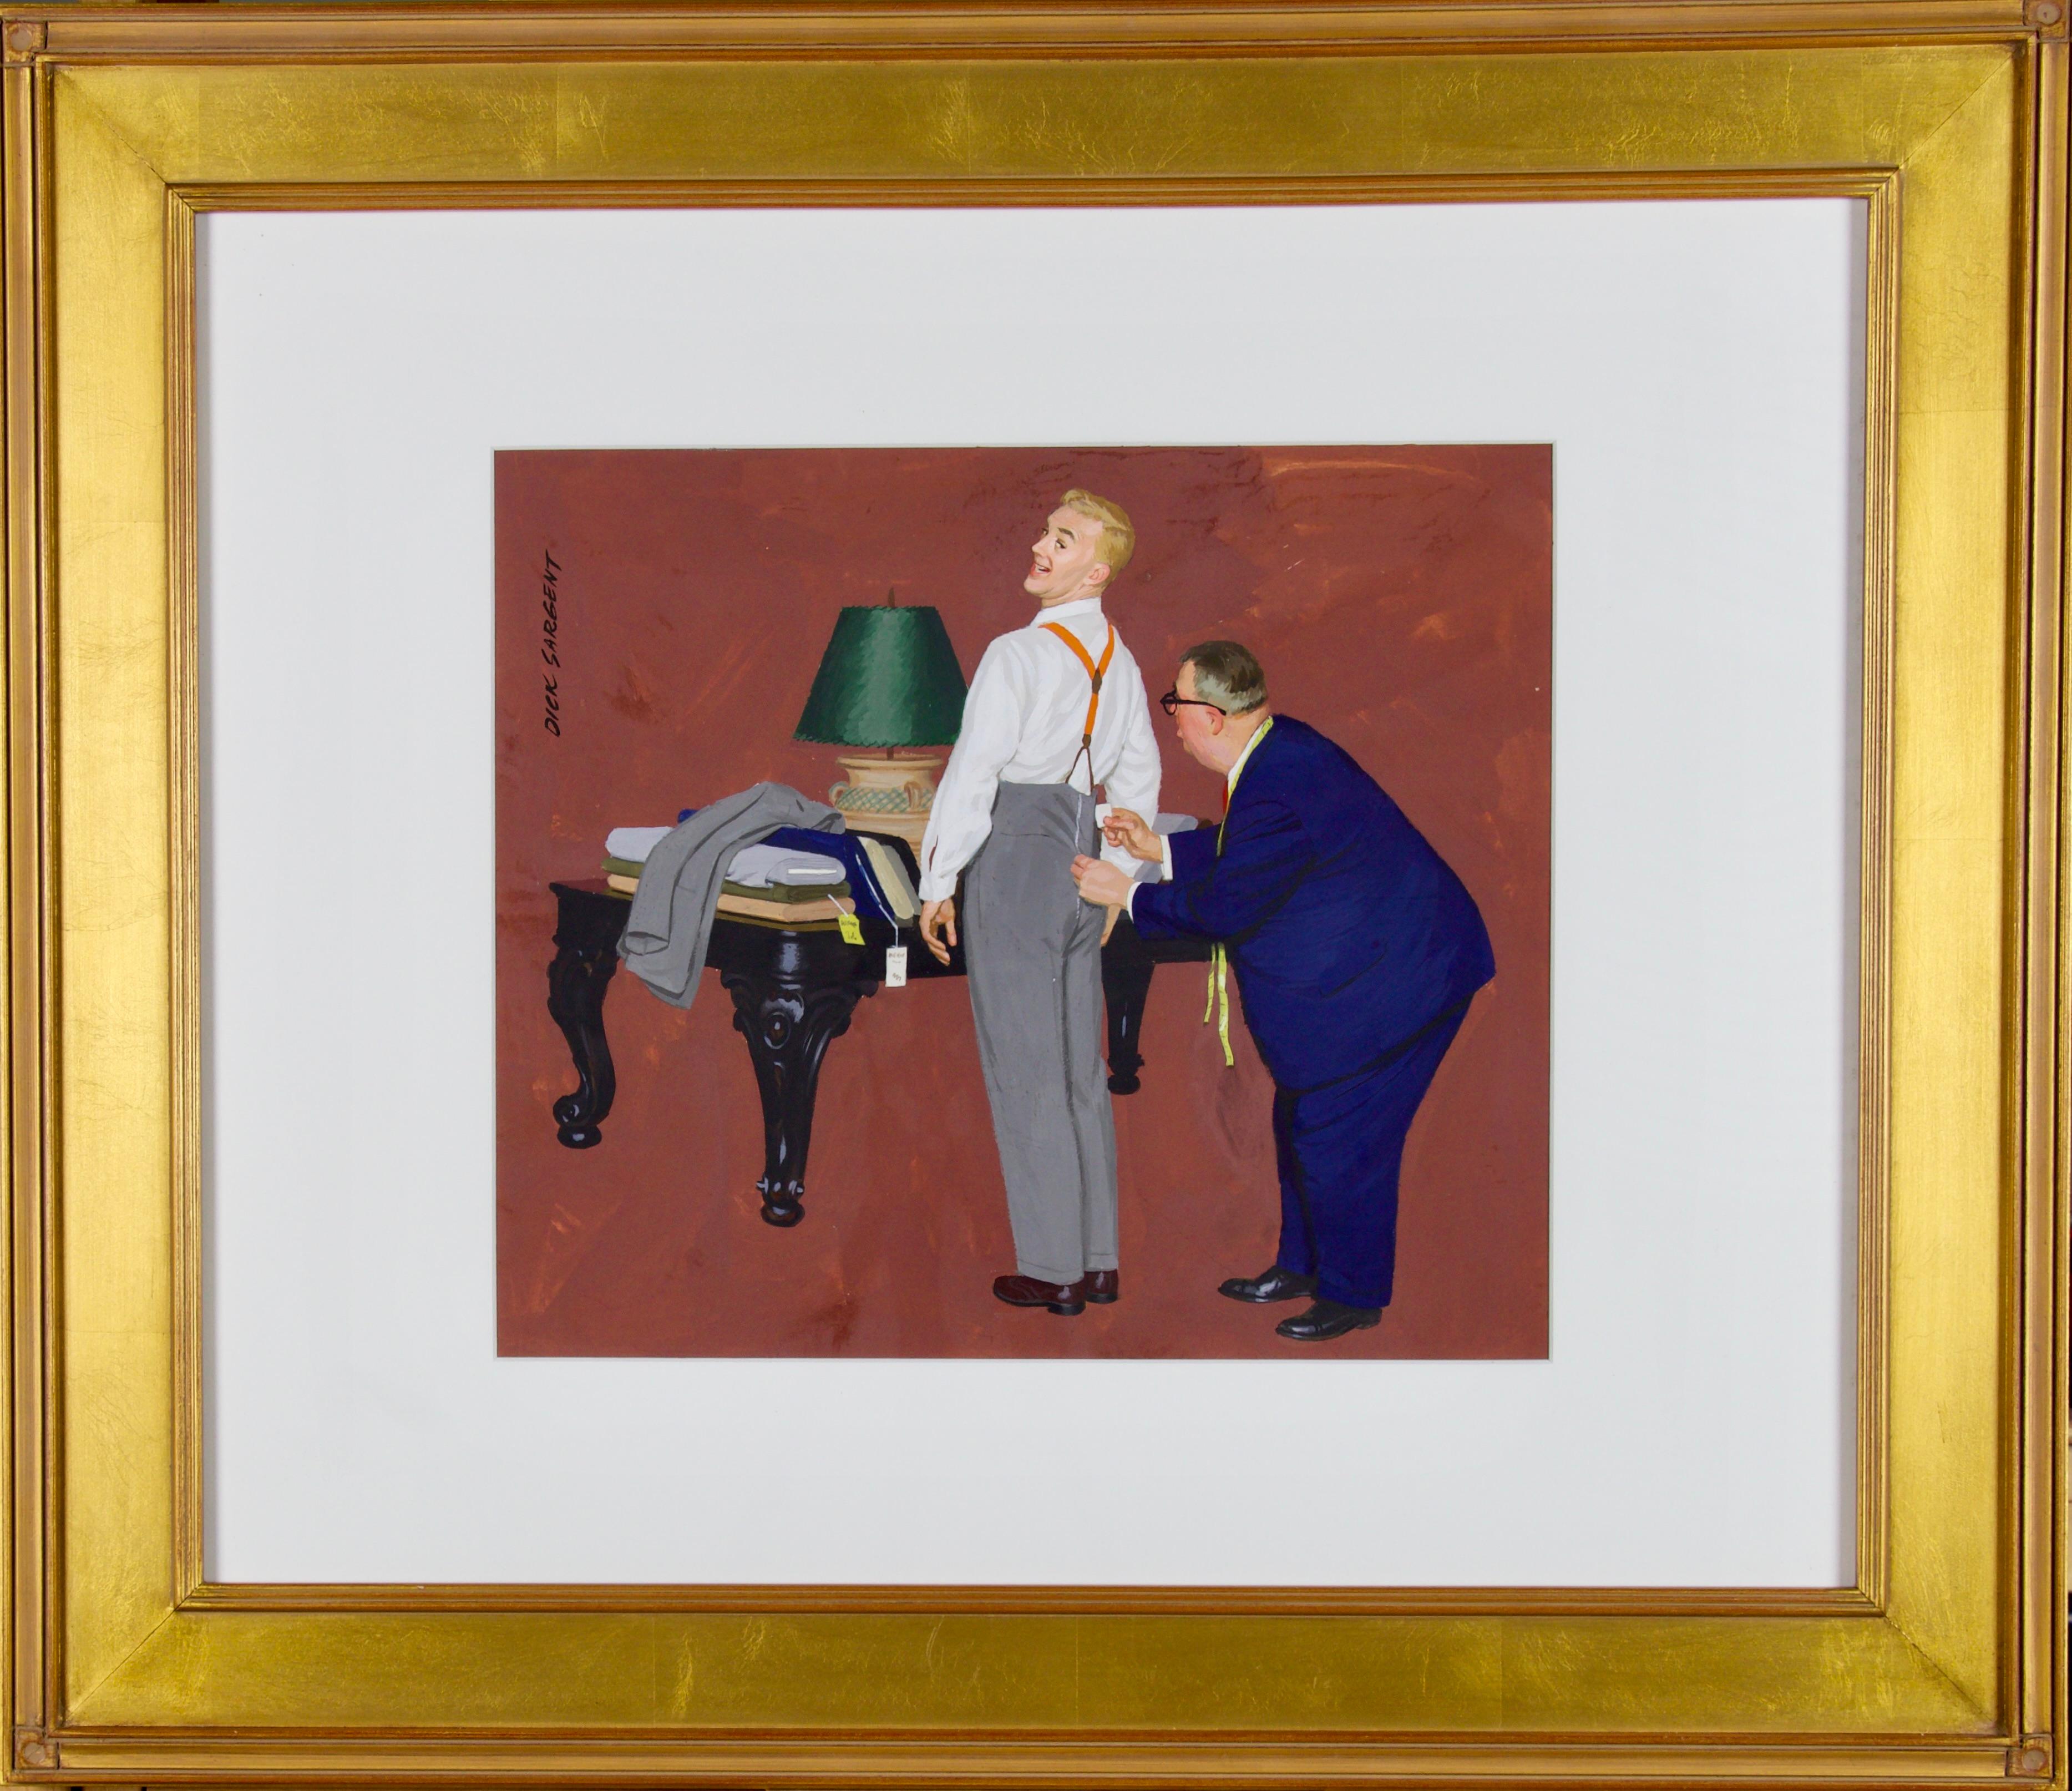 Suit Fitting, Post Cereal Advertisement - Painting by Richard Sargent